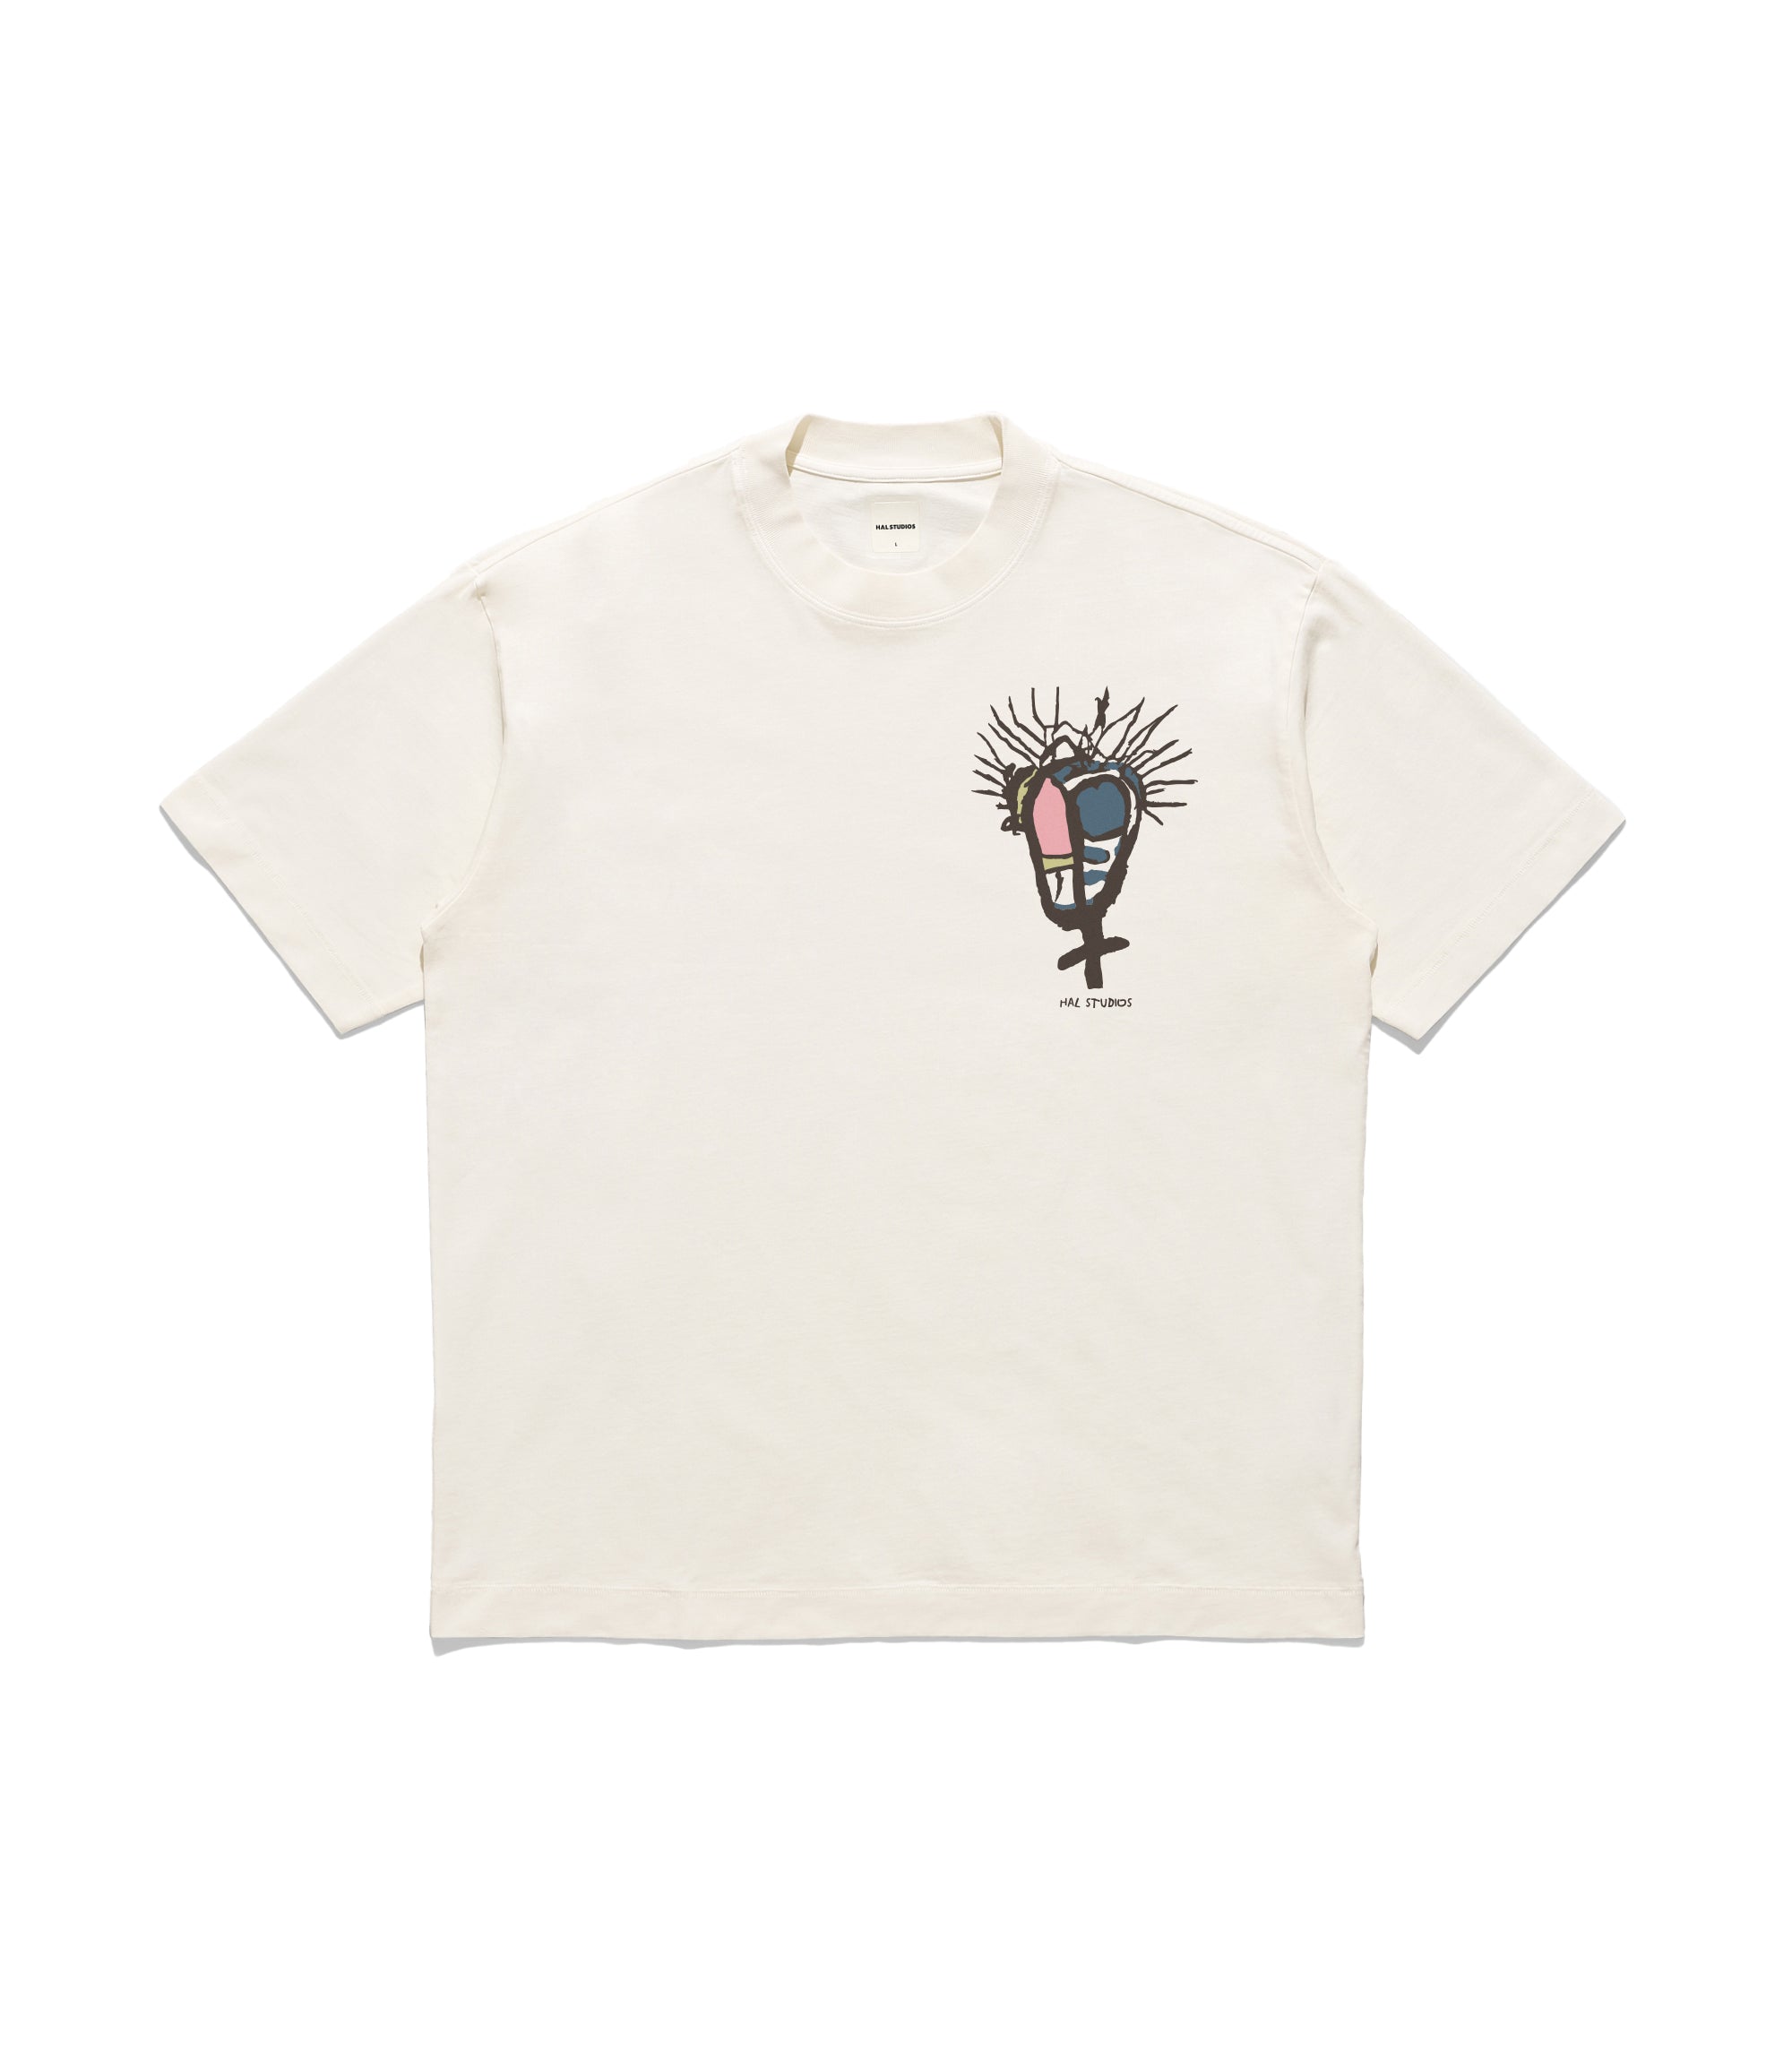 Most Kings T-Shirt - Off White